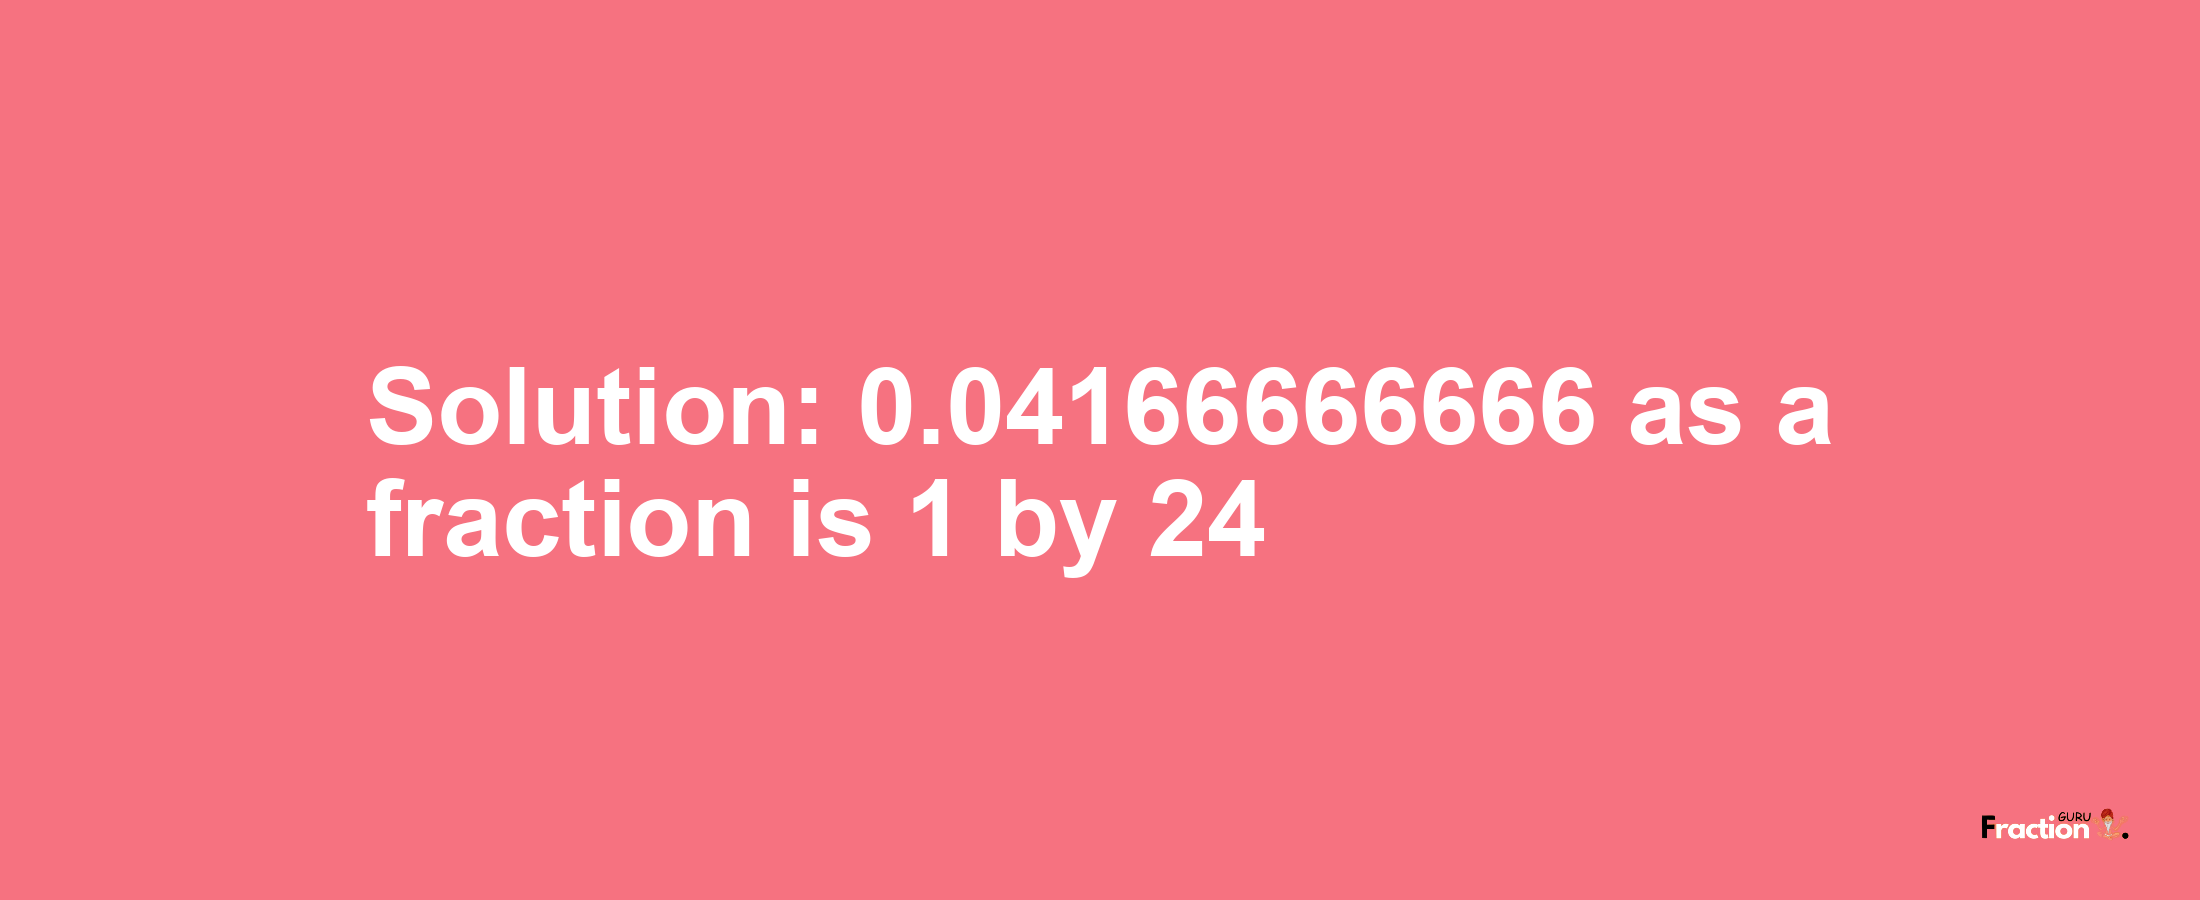 Solution:0.04166666666 as a fraction is 1/24